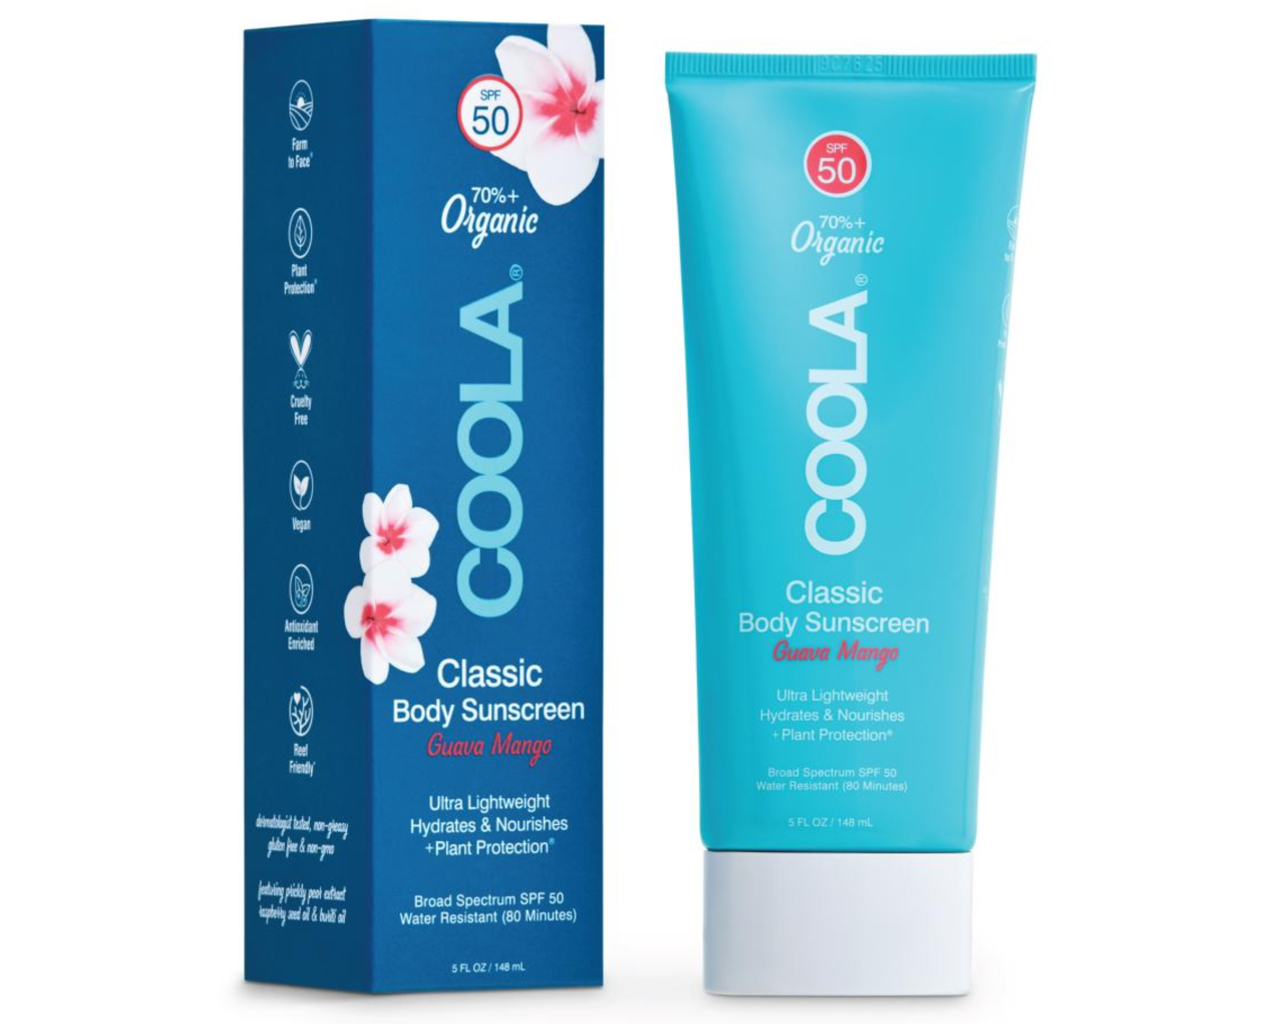 does coola sunscreen have benzene